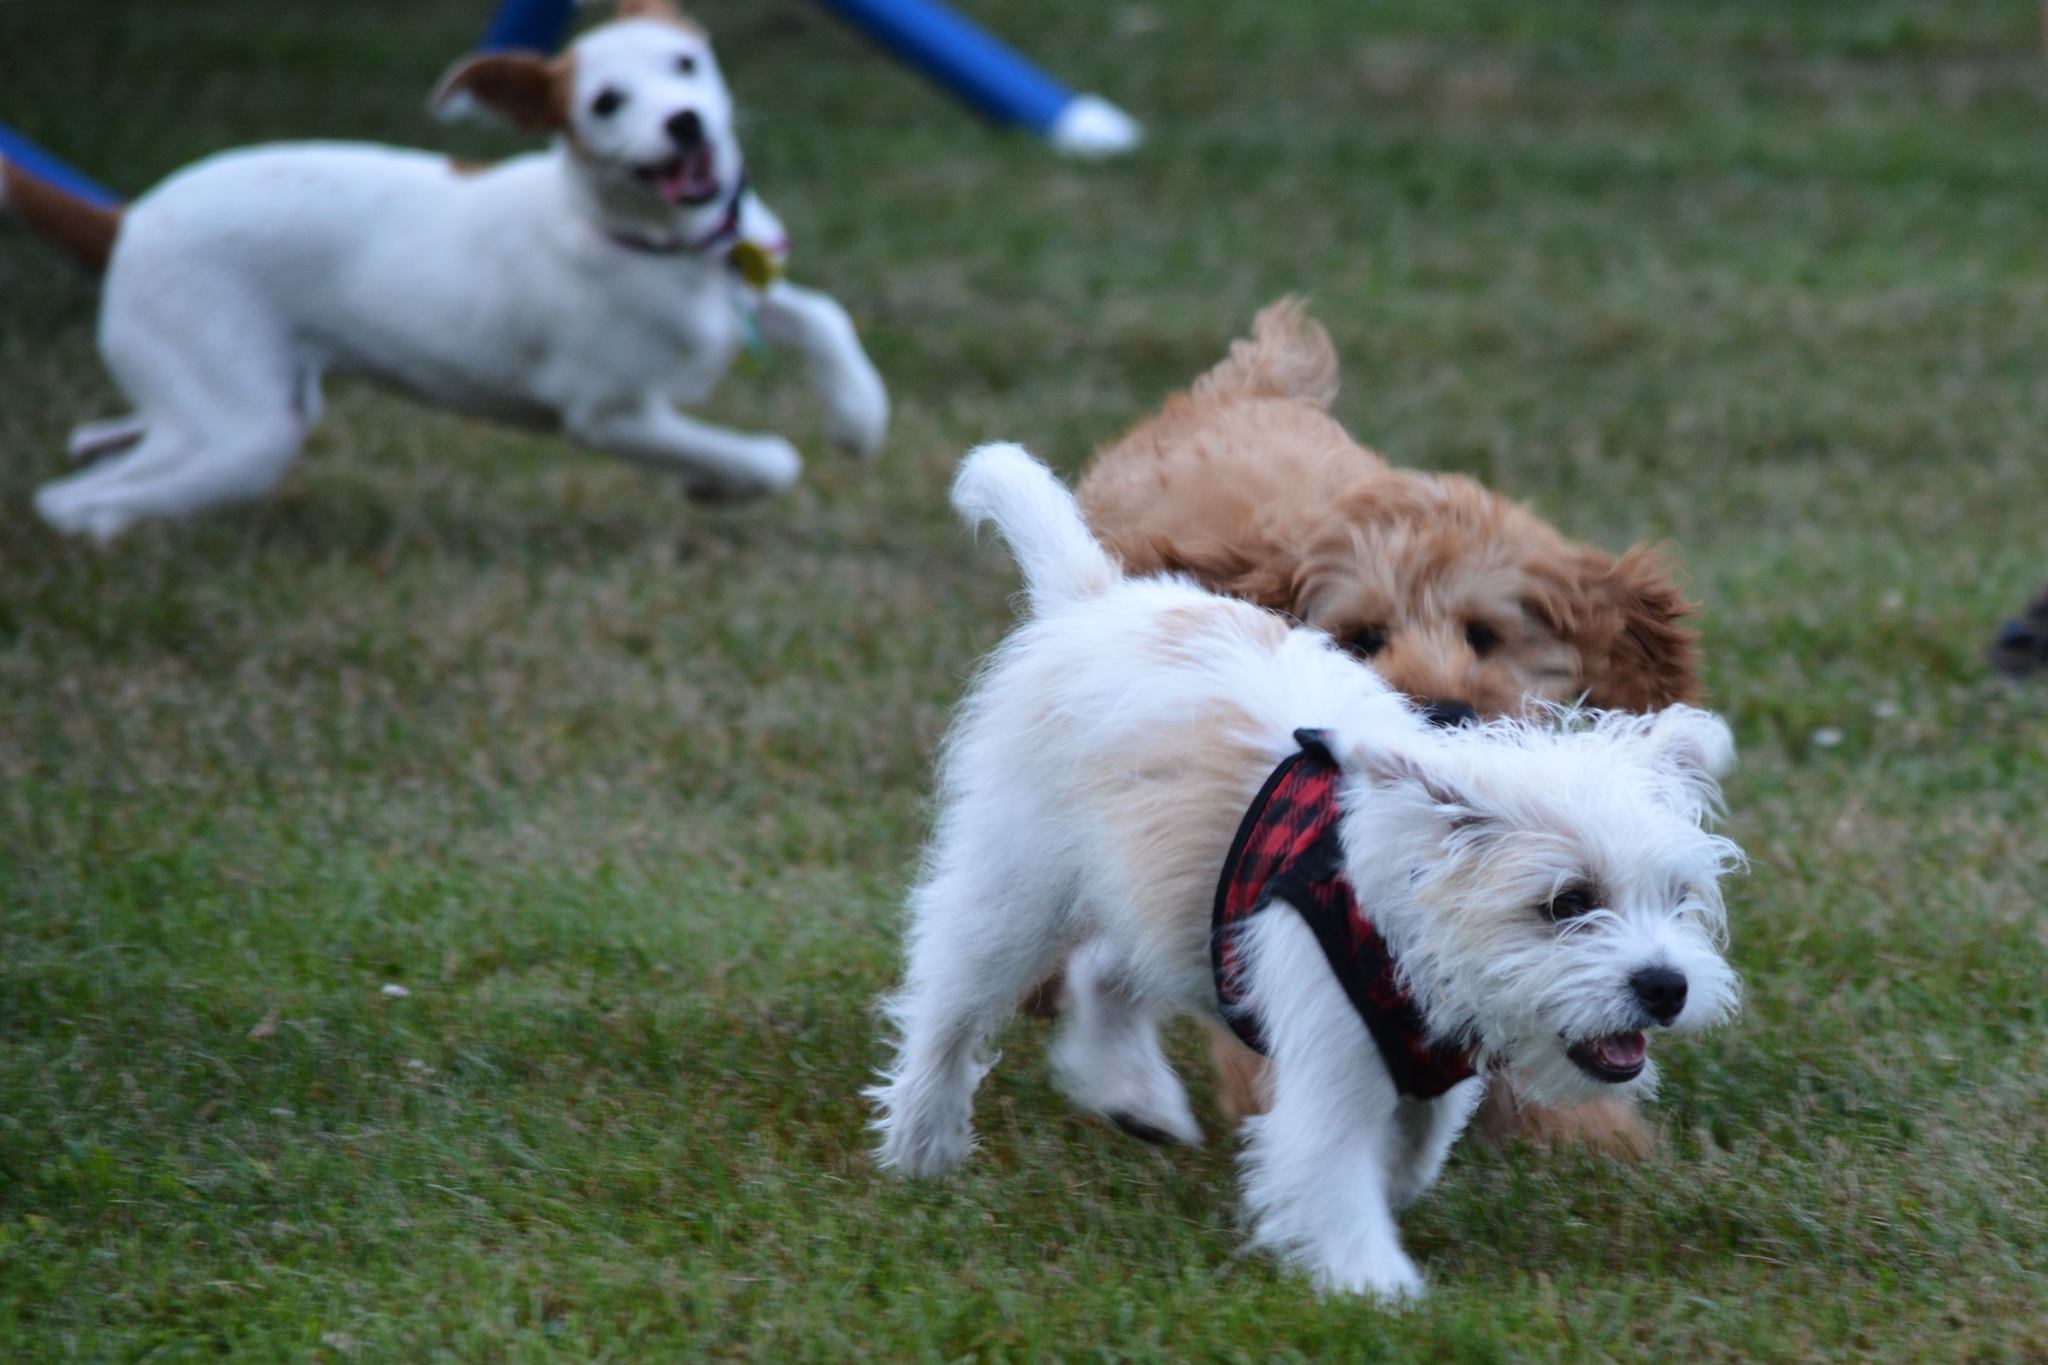 three small young dogs run around and play in a grassy field